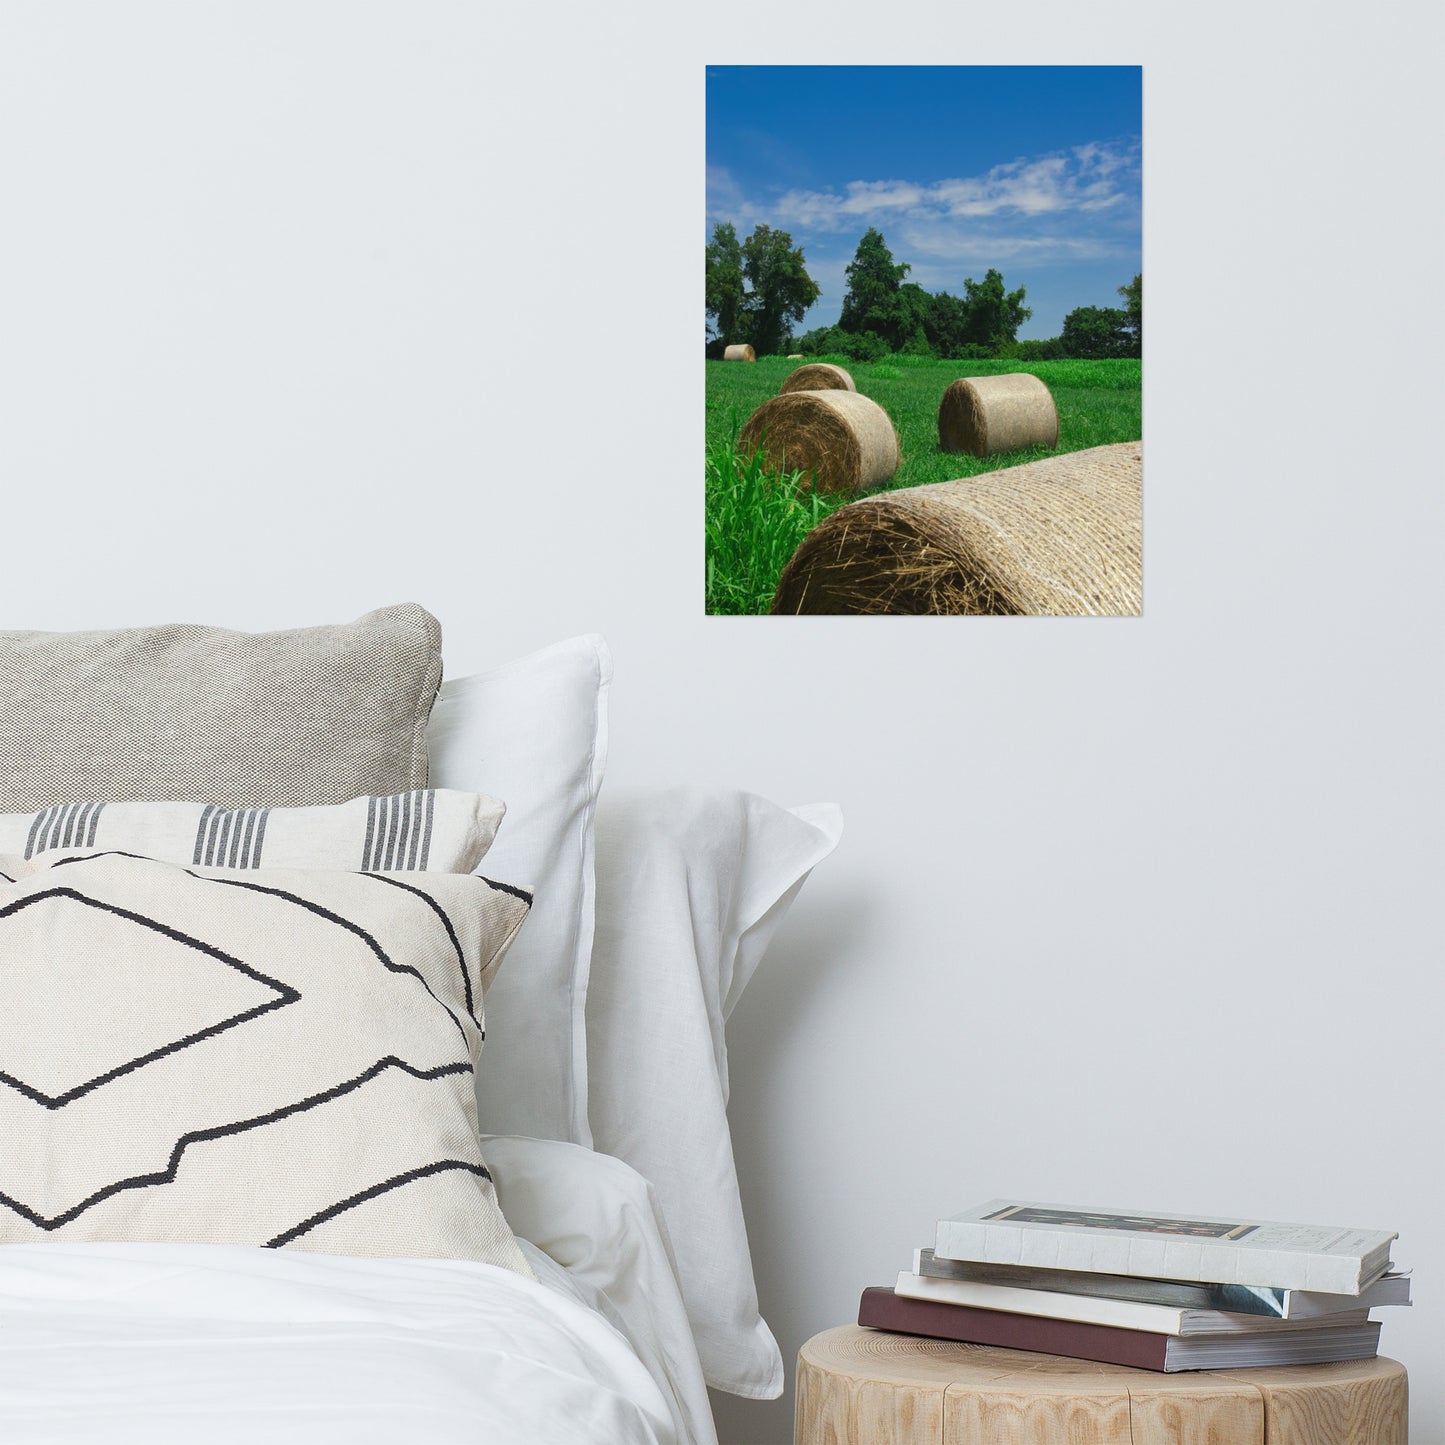 Hay Whatcha Doin' in the Field Landscape Photo Loose Wall Art Print